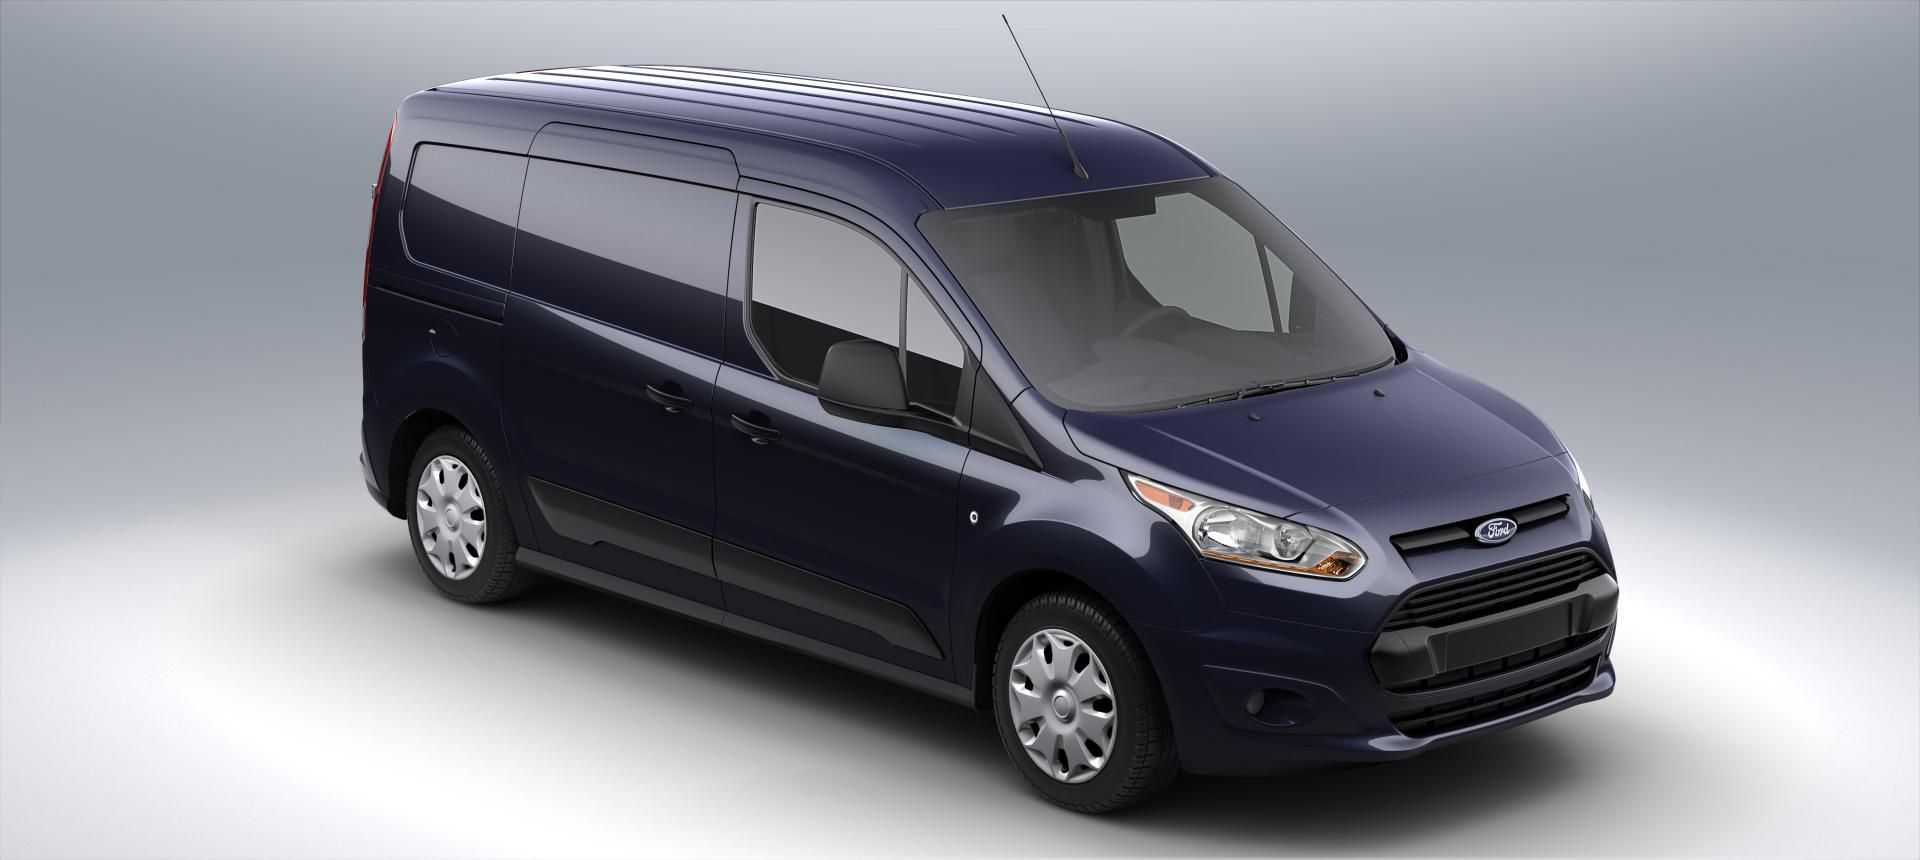 Ford Transit Connect Van News and Information